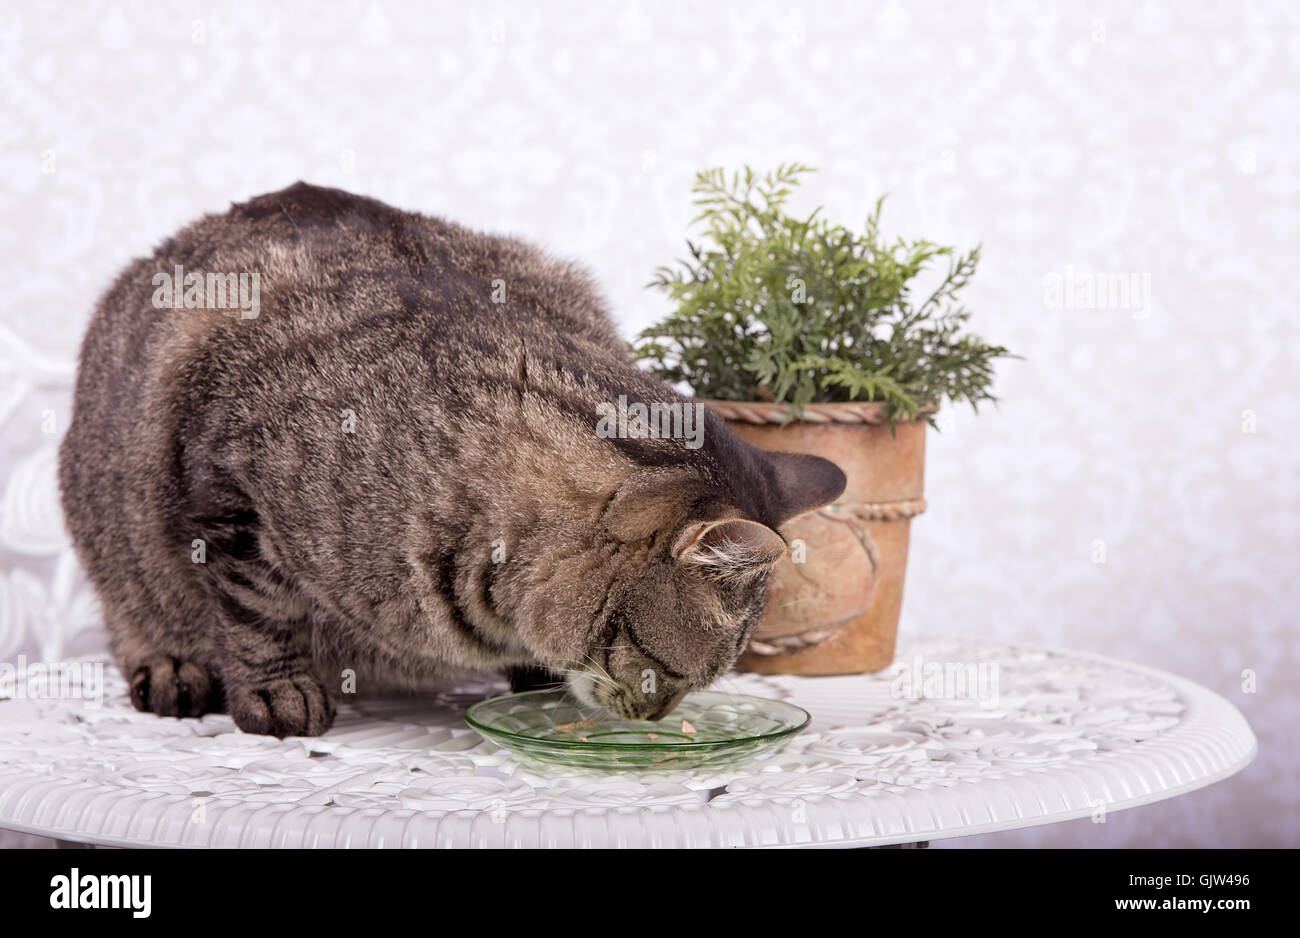 A cat eats canned cat food from a green glass dish on white table Stock Photo